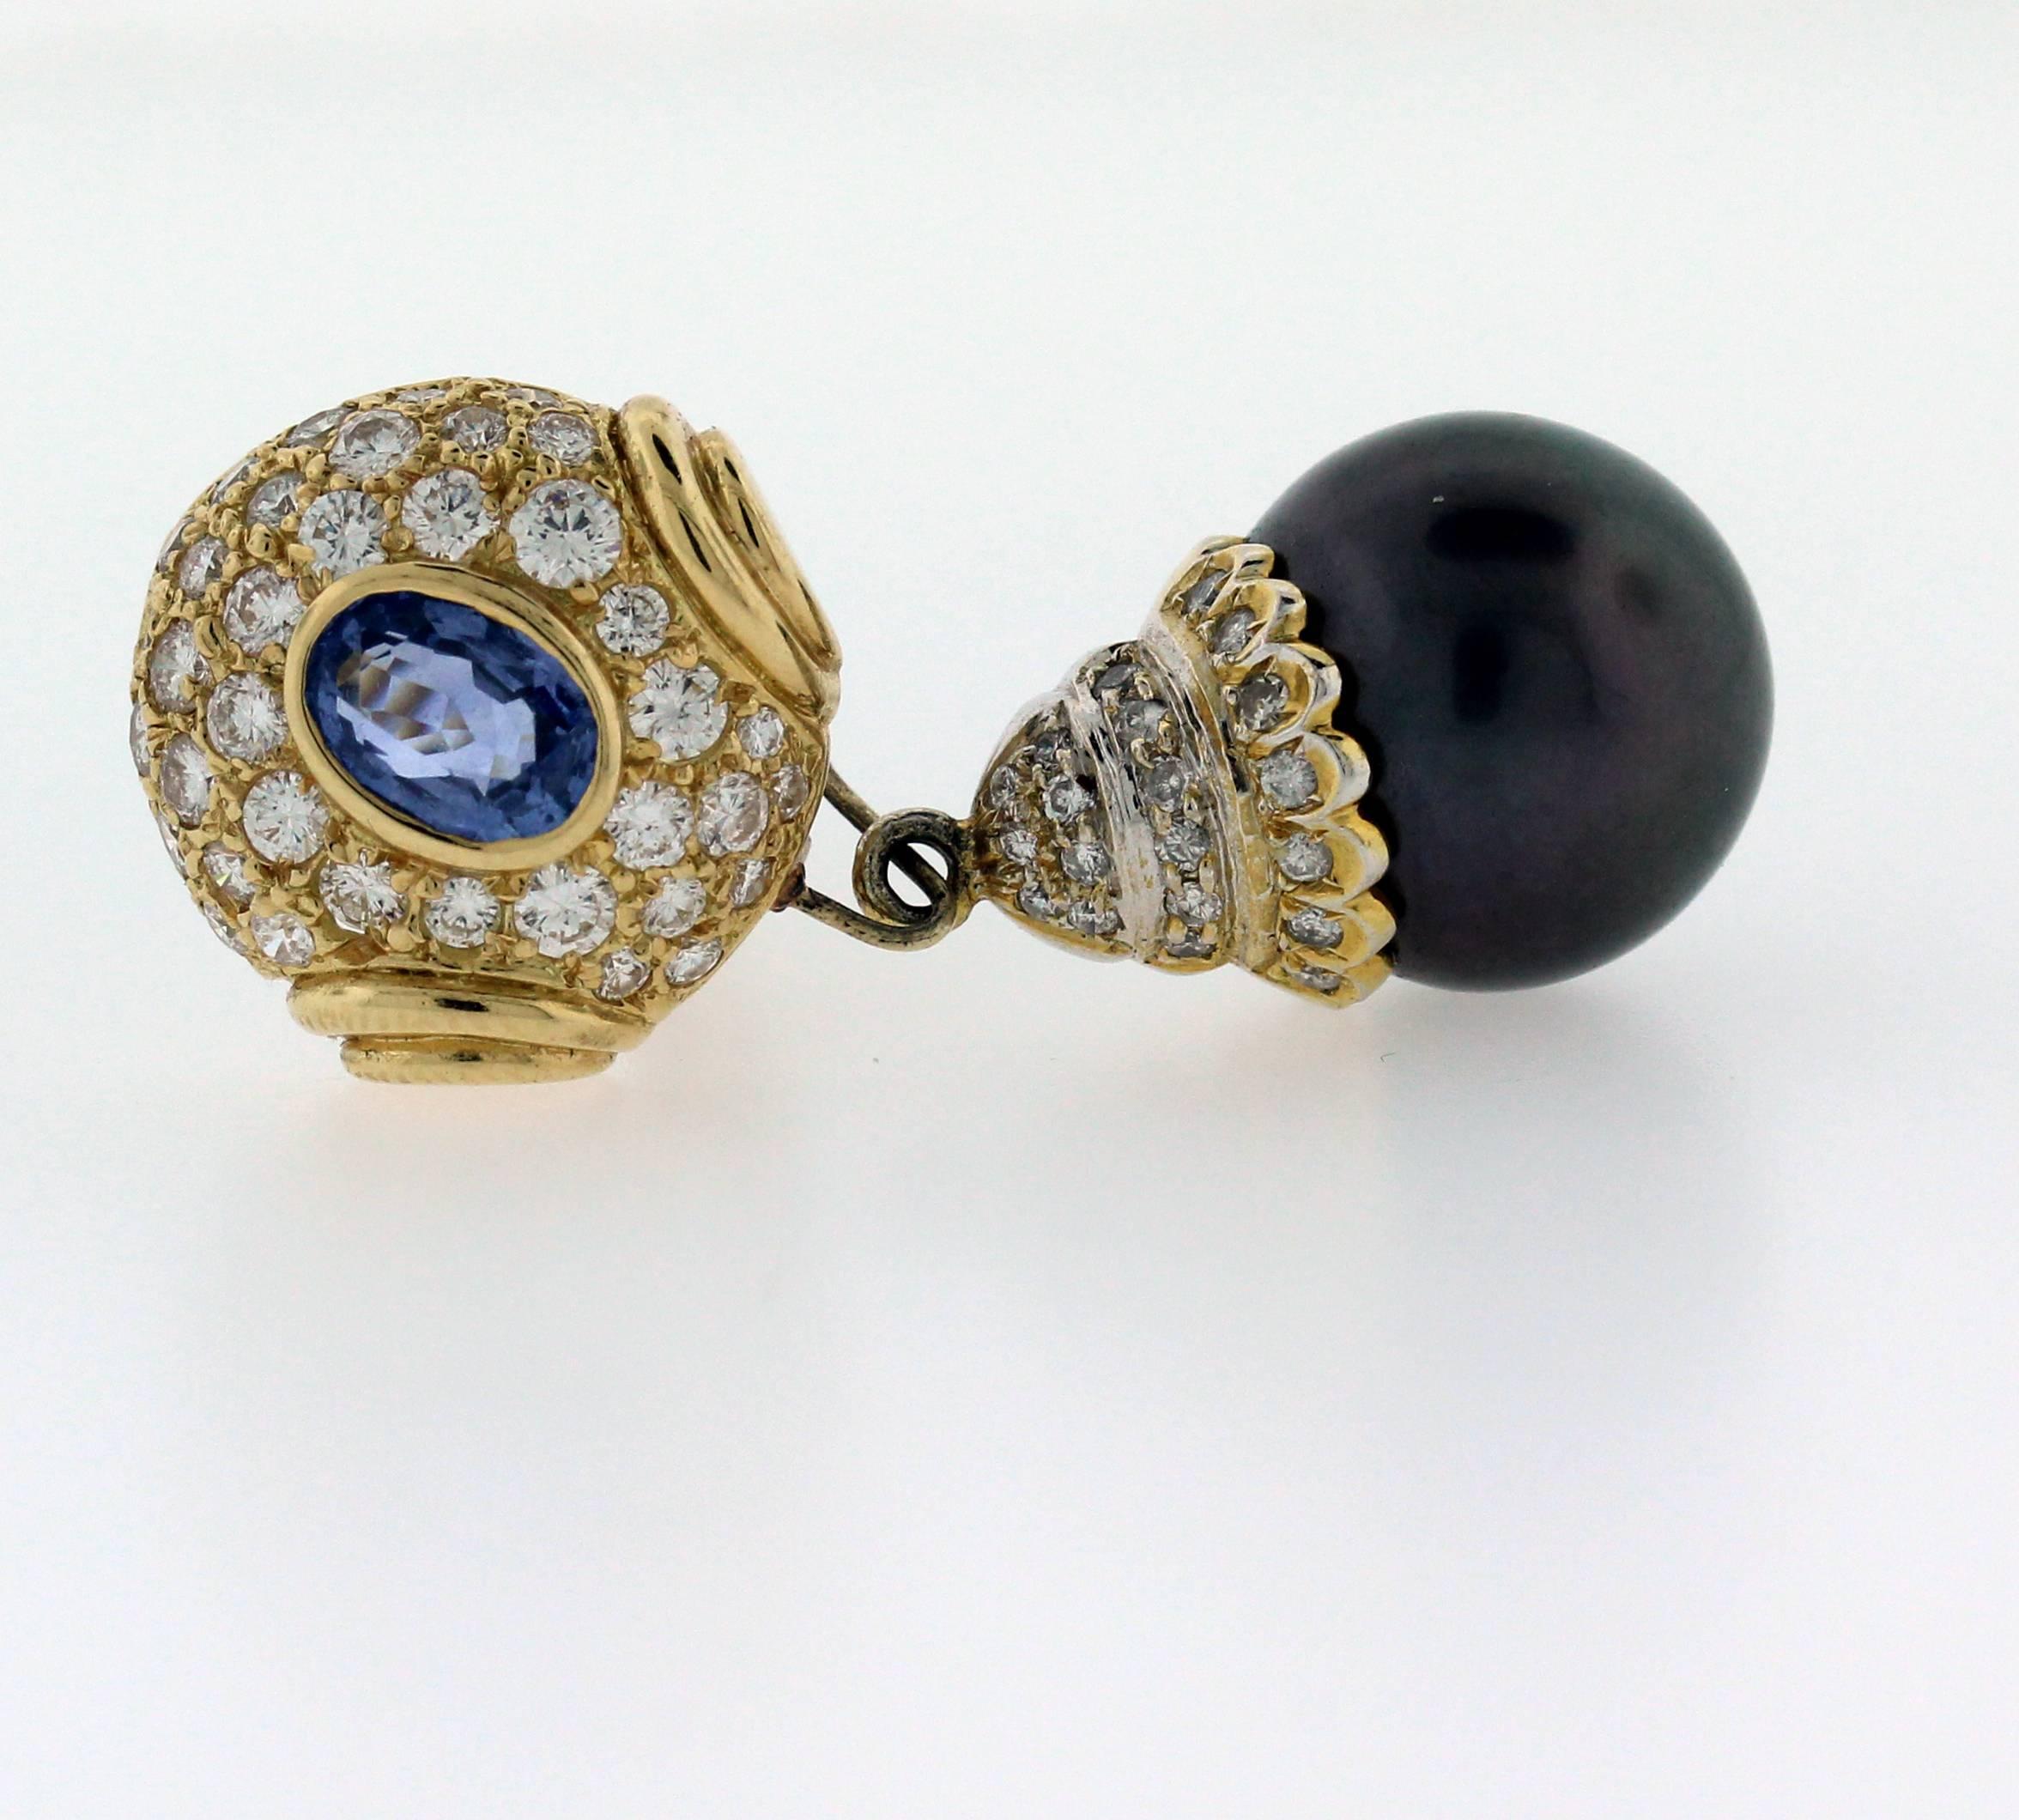 18K Gold Earrings with Black Pearls, Blue Sapphires and Diamonds

Gorgeous matching pair of black pearls

Apprx. 2.00ct. Blue Sapphires 

3.00ct. apprx. Diamonds

Earrings are 1.5 inch Length

Post-Omega Back

Estate